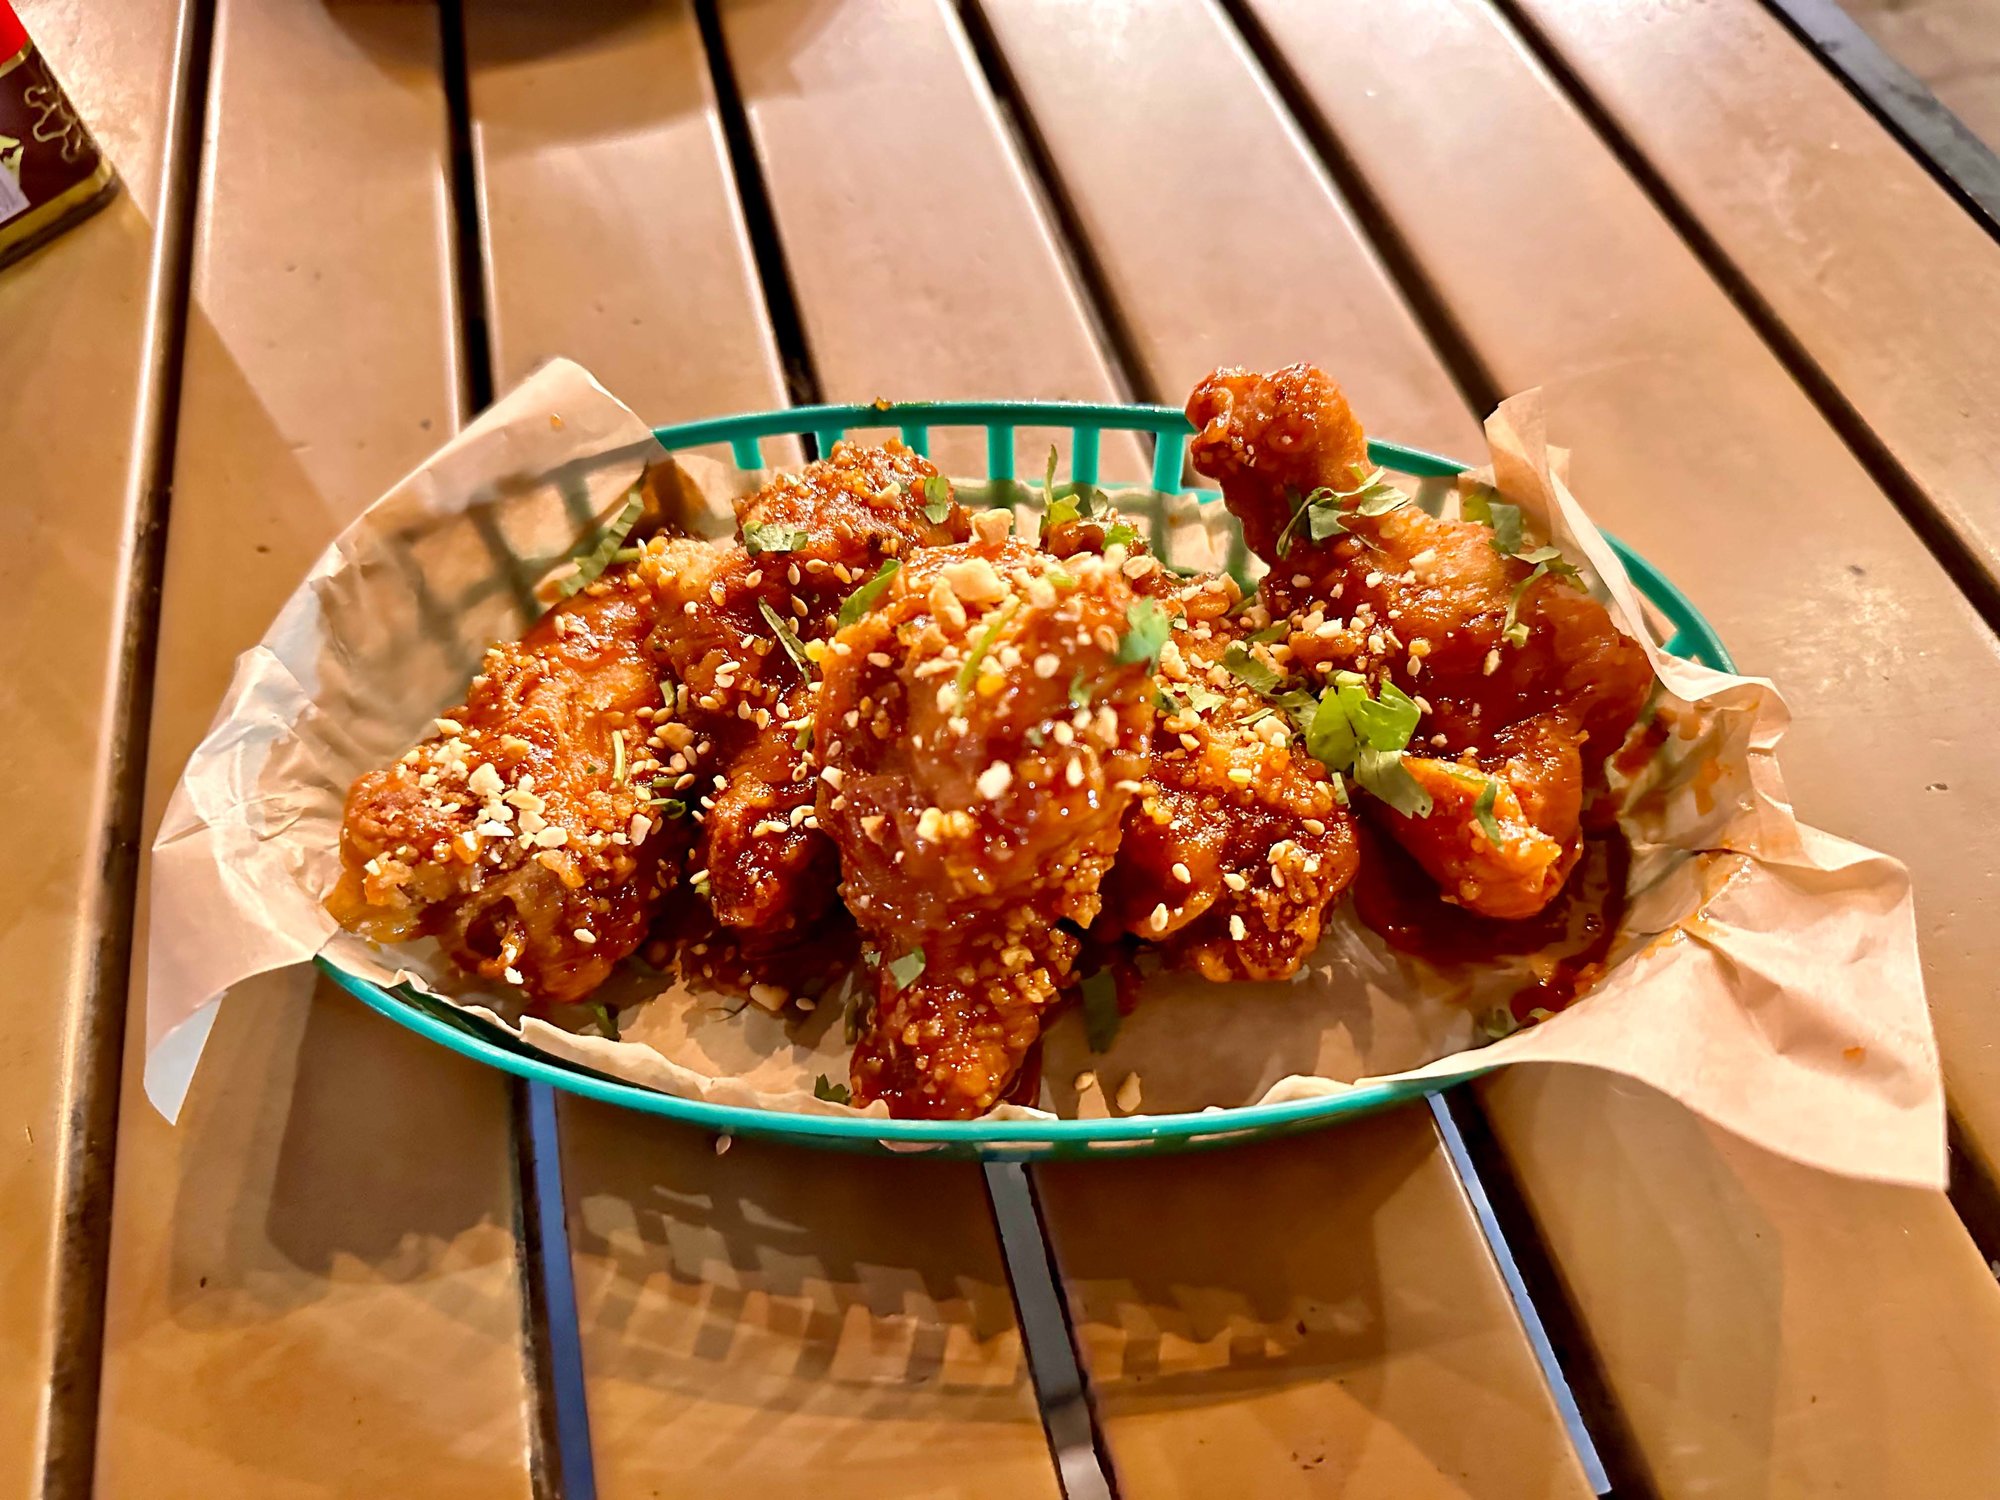 korean twice fried wings in a teal plastic container with paperon a table